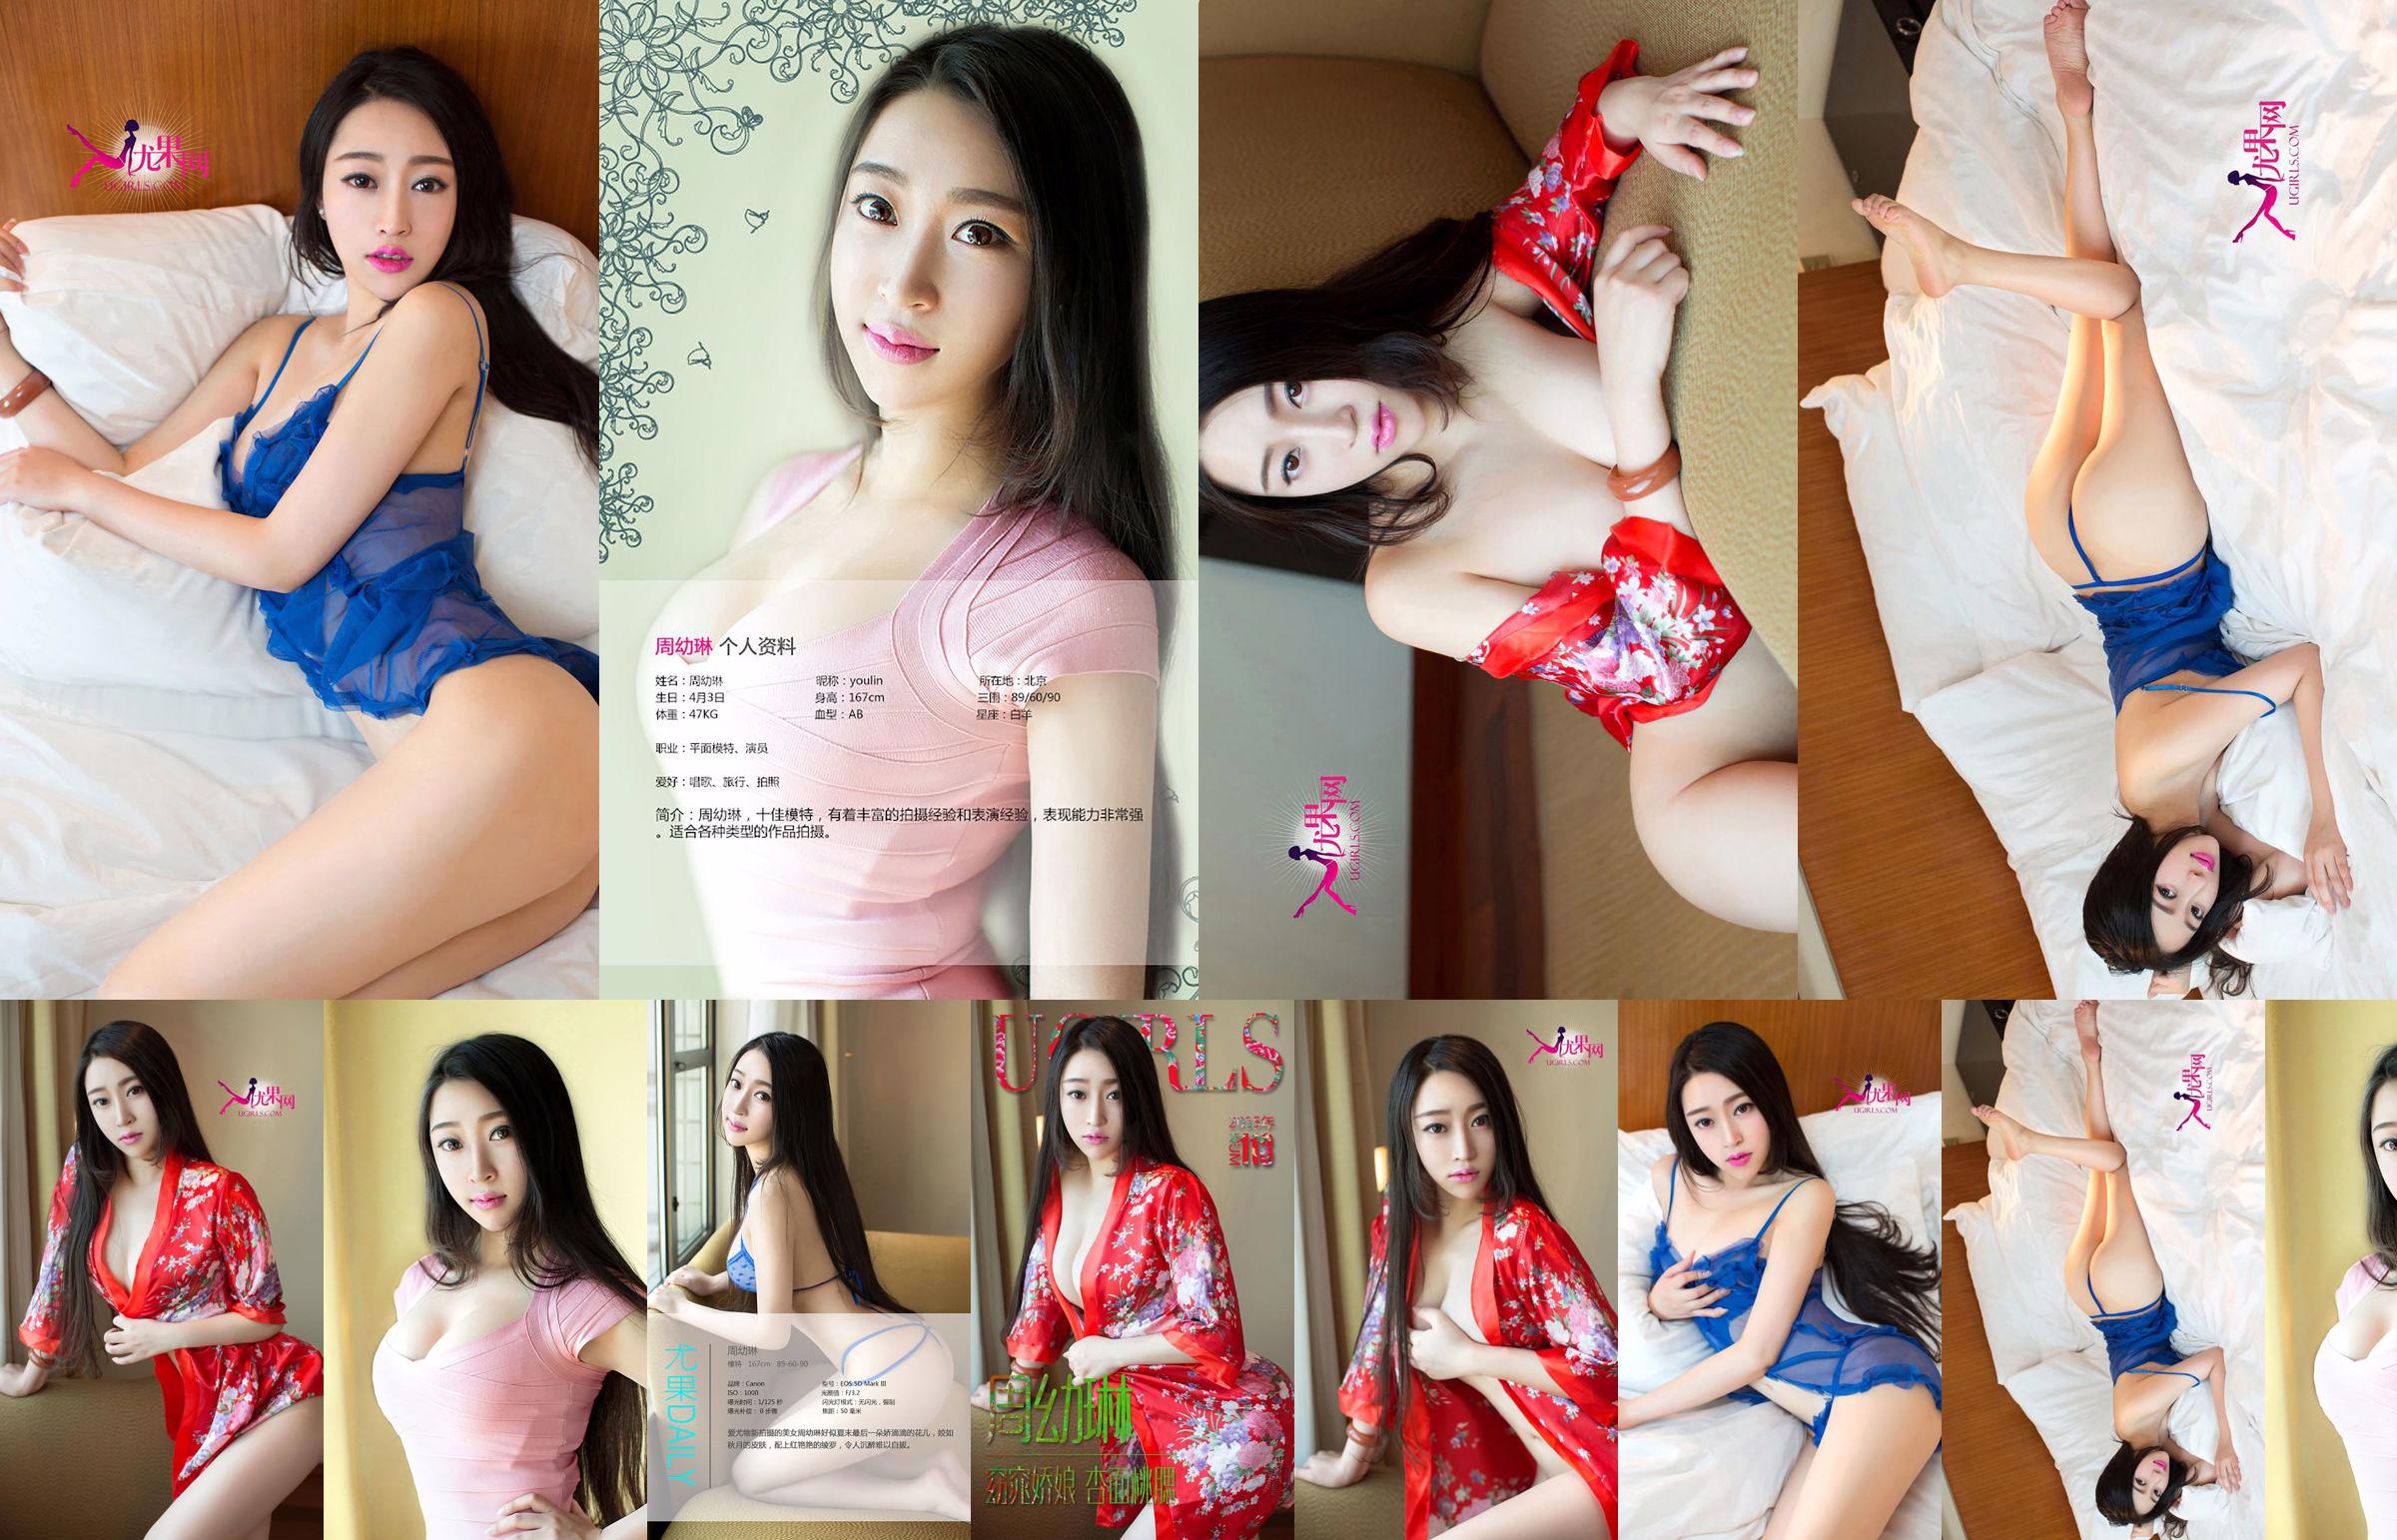 Zhou Youlin "A Beautiful Girl with Apricot Face and Peach Cheeks" [Love Youwu Ugirls] No.113 No.fd88ec Page 1